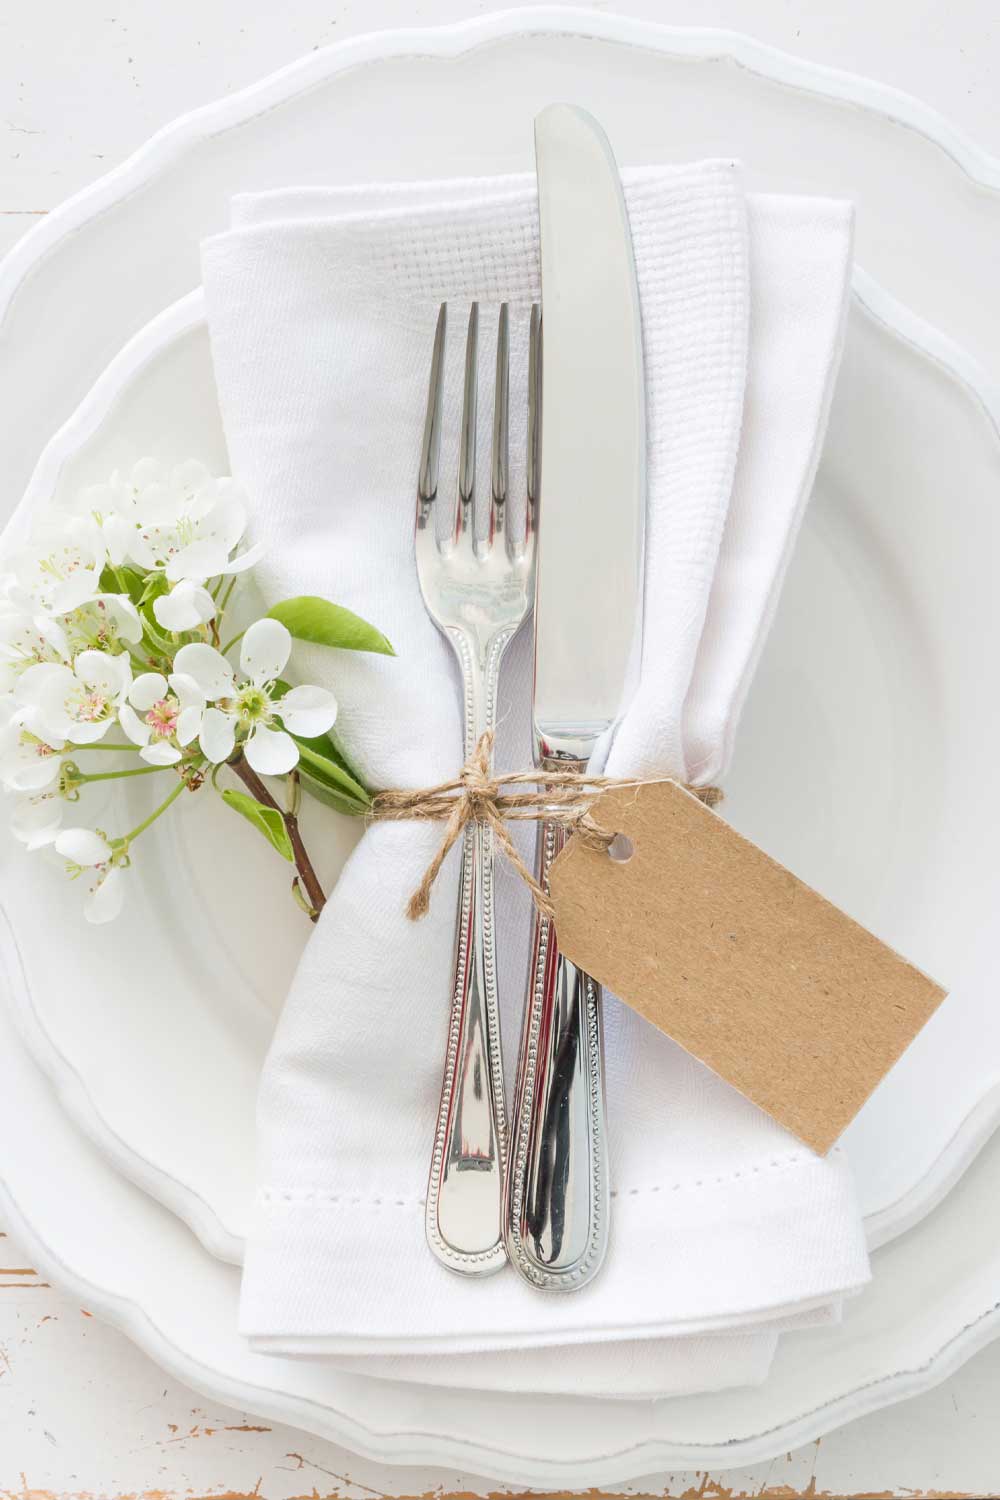 Napkins with Flowers